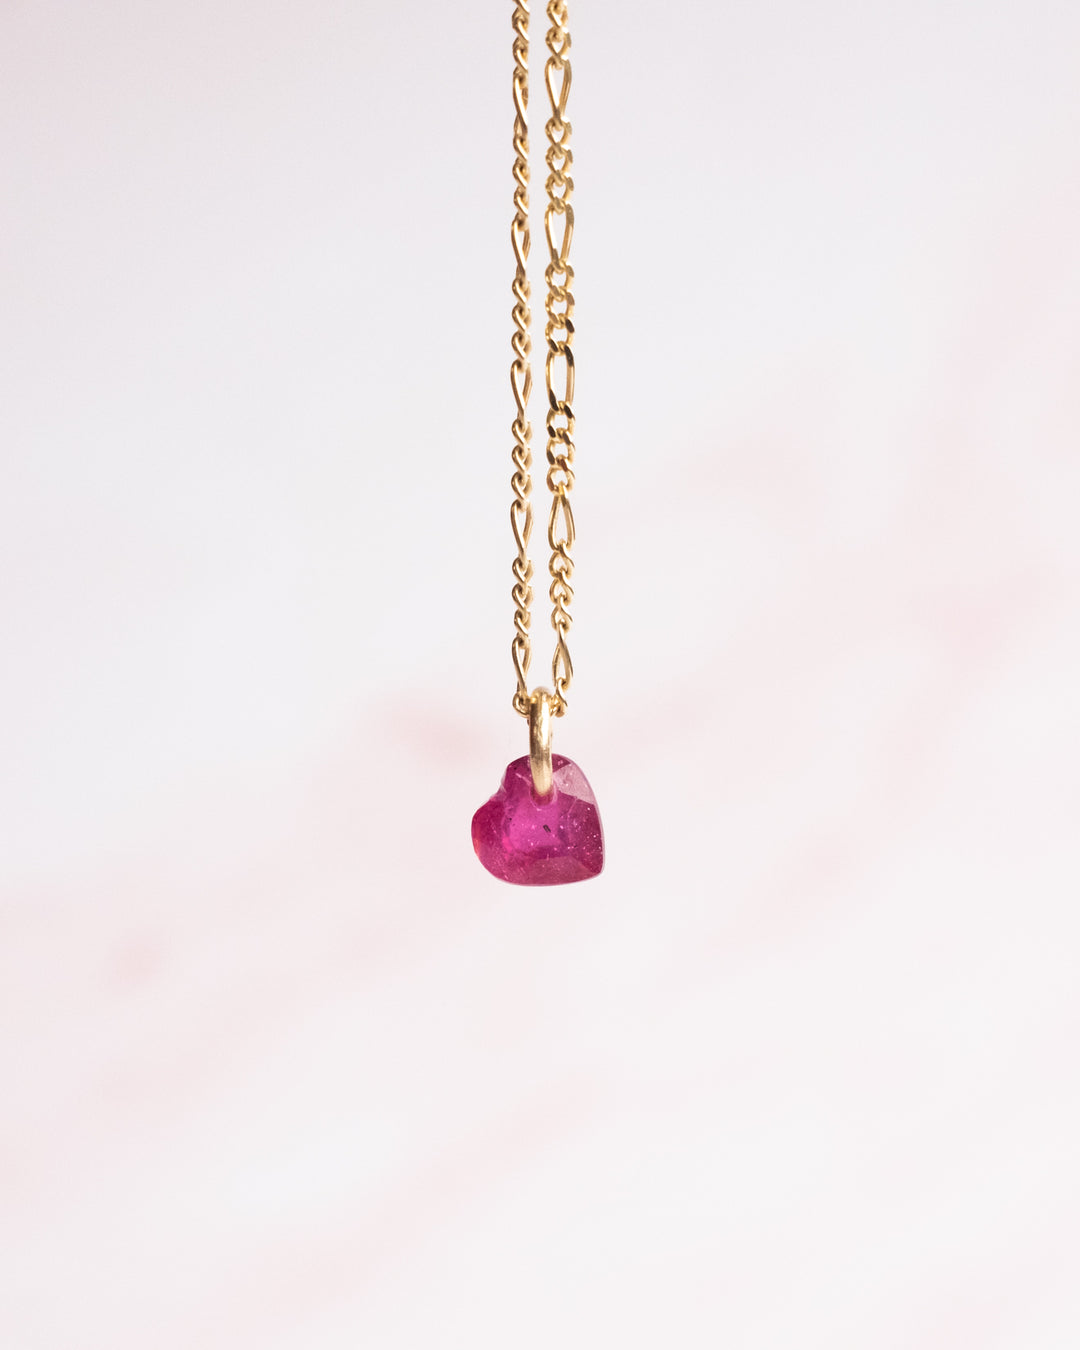 Mini Ruby Heart Necklace on 9ct Gold - The Healing Pear